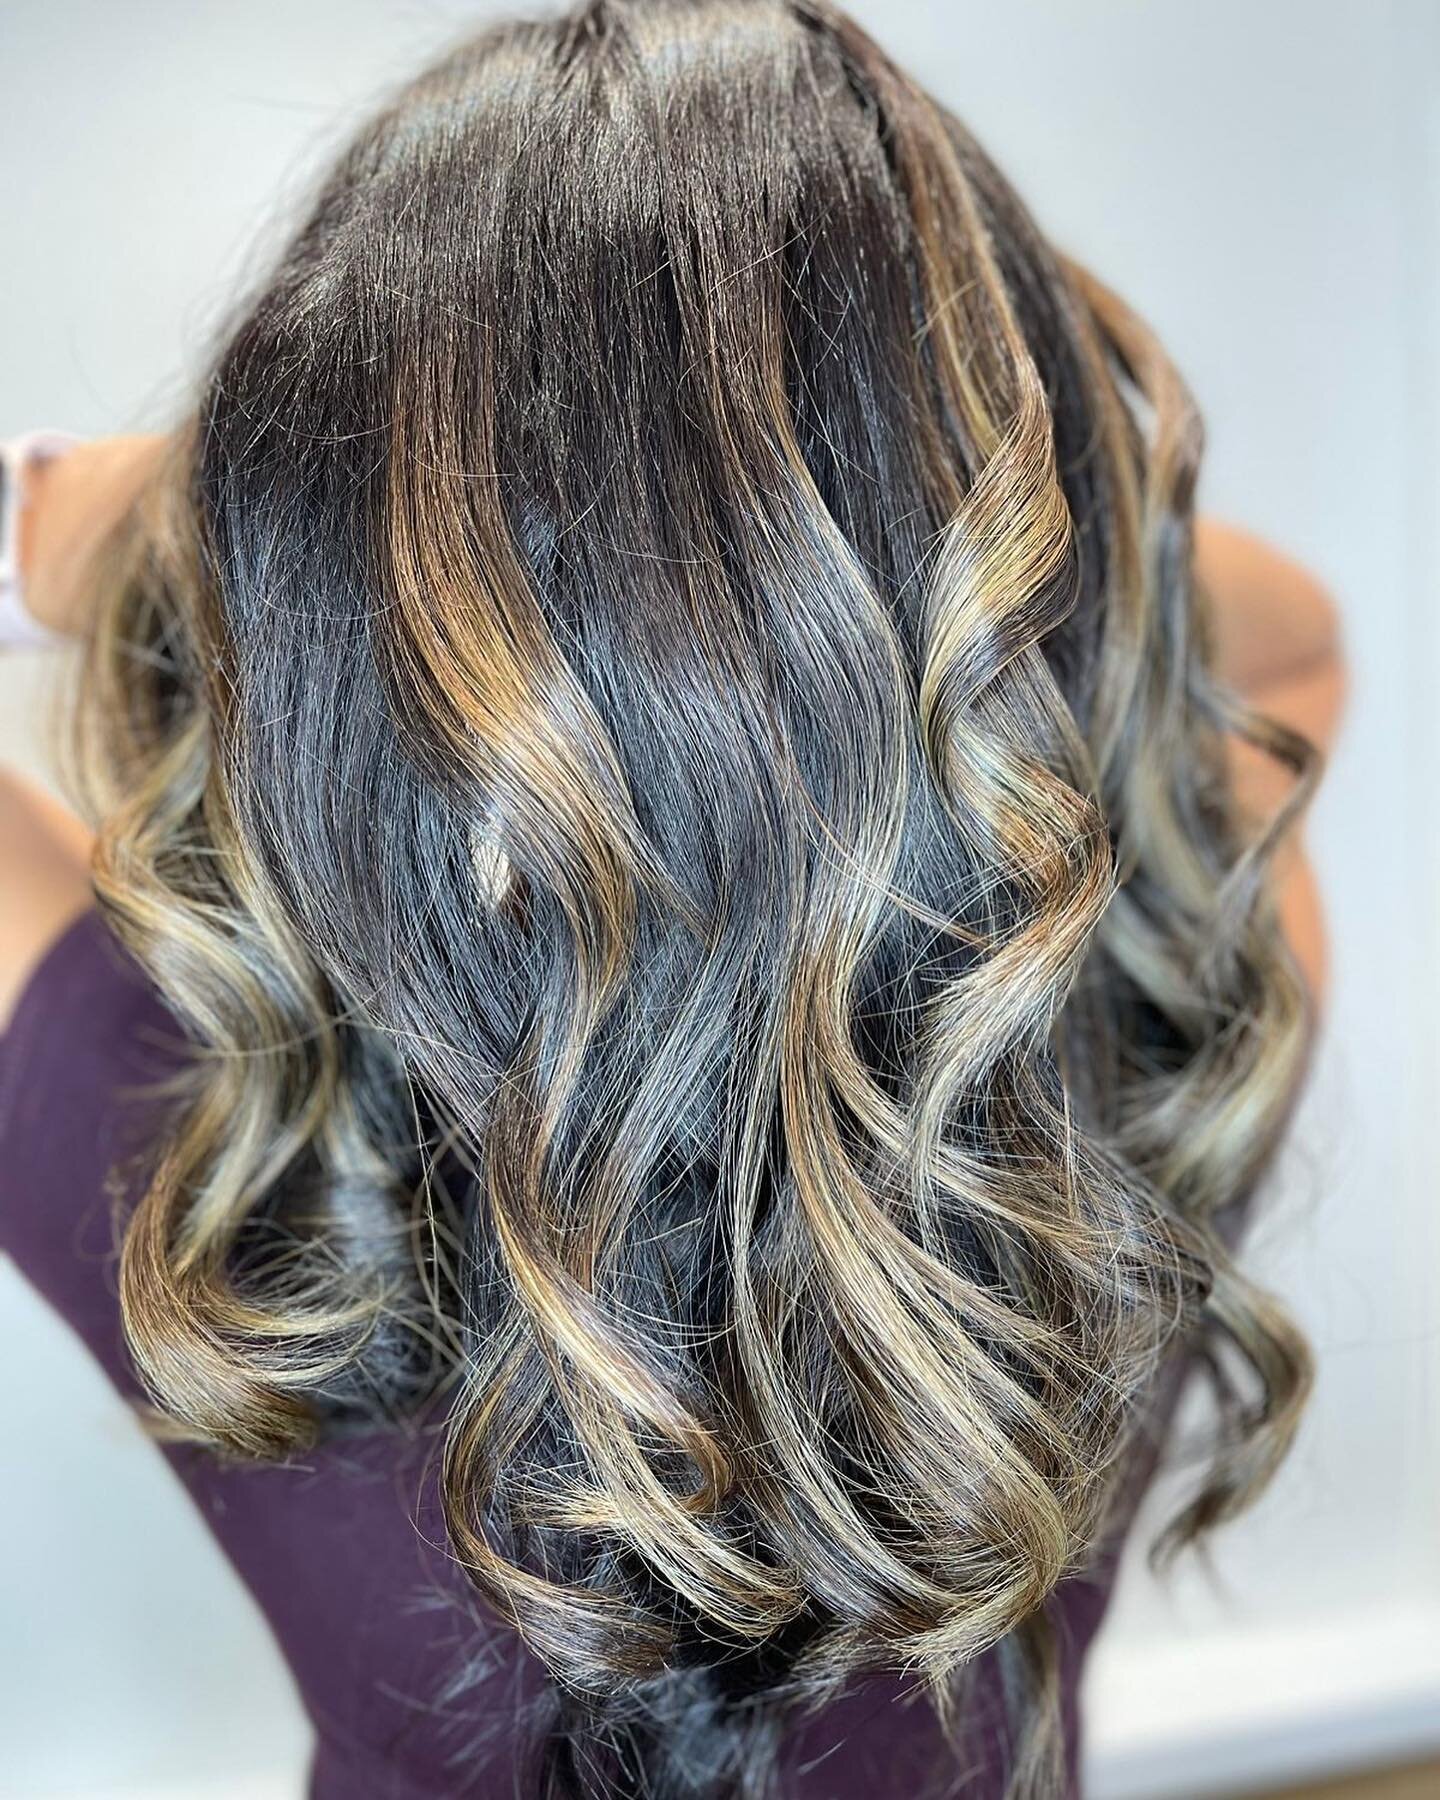 Ombre is a hair coloring technique where the hair is gradually blended from a darker shade to a lighter shade, or vice versa. The transition between the colors should be smooth and gradual, without any harsh lines or noticeable boundaries. The term &